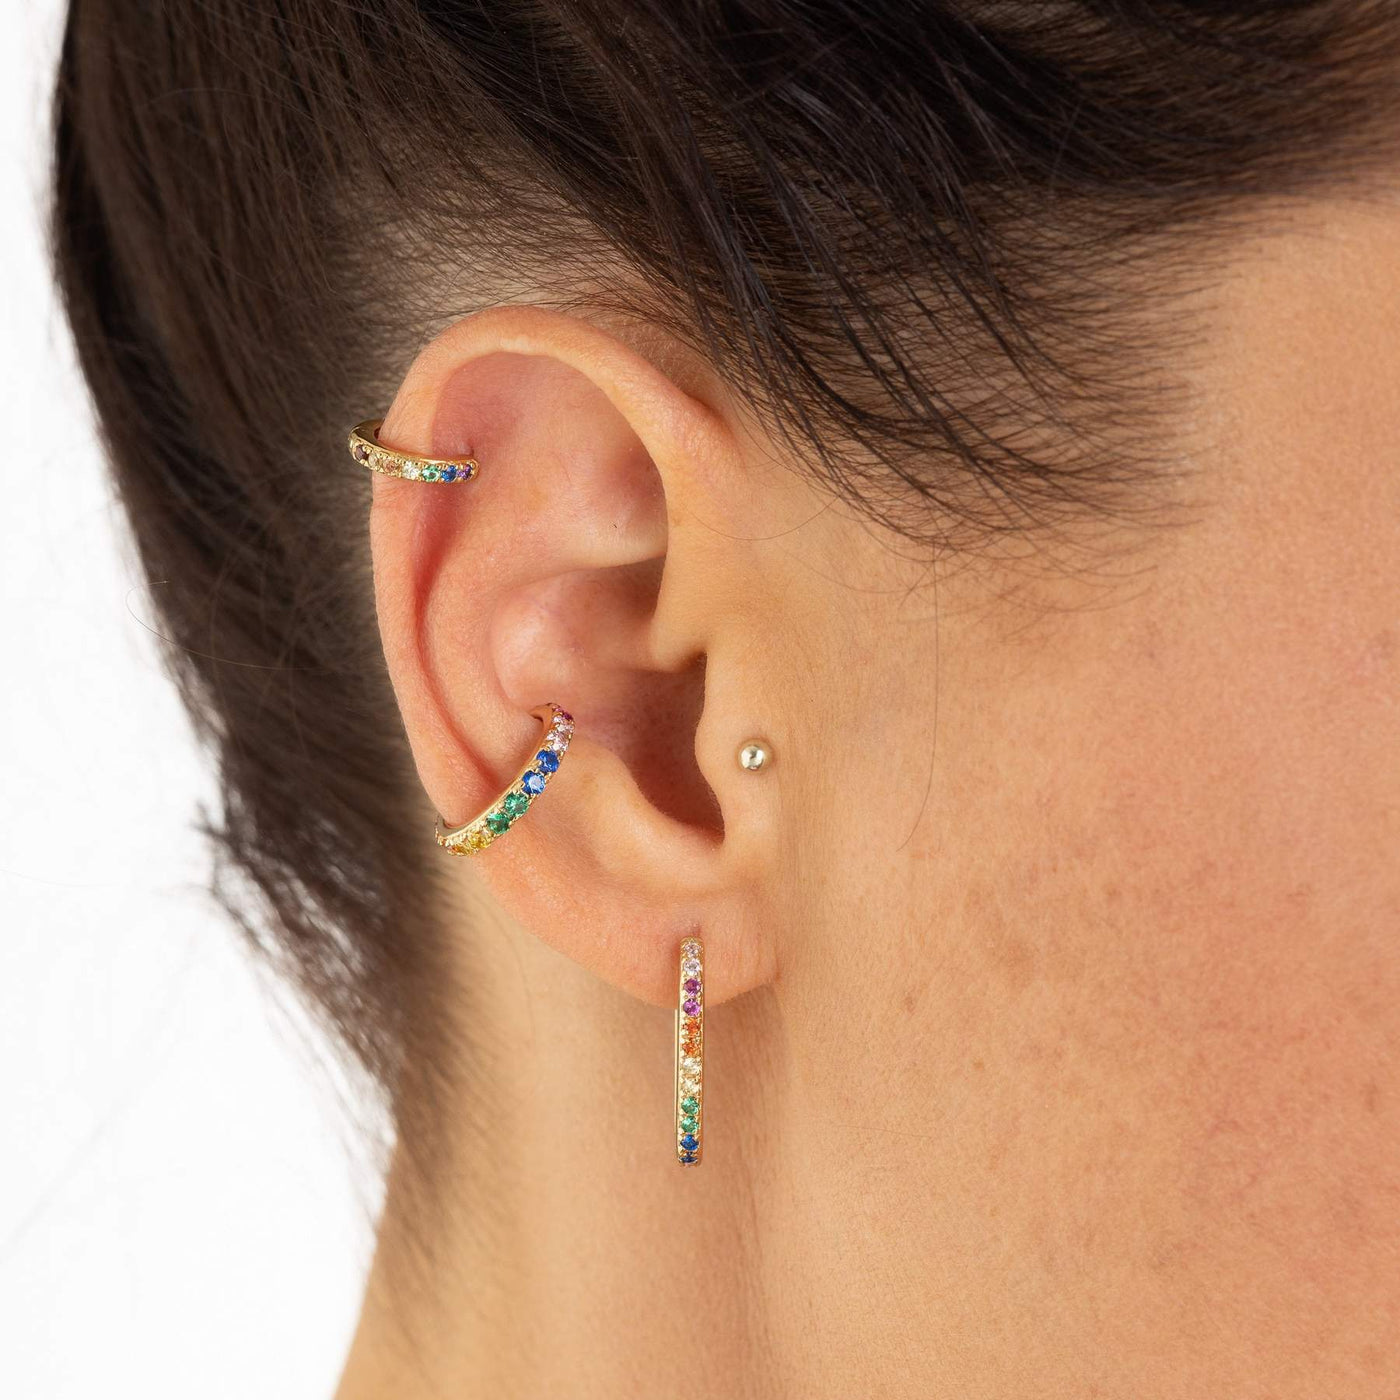 Huggie Earrings with Rainbow Stones in Gold Plated Silver